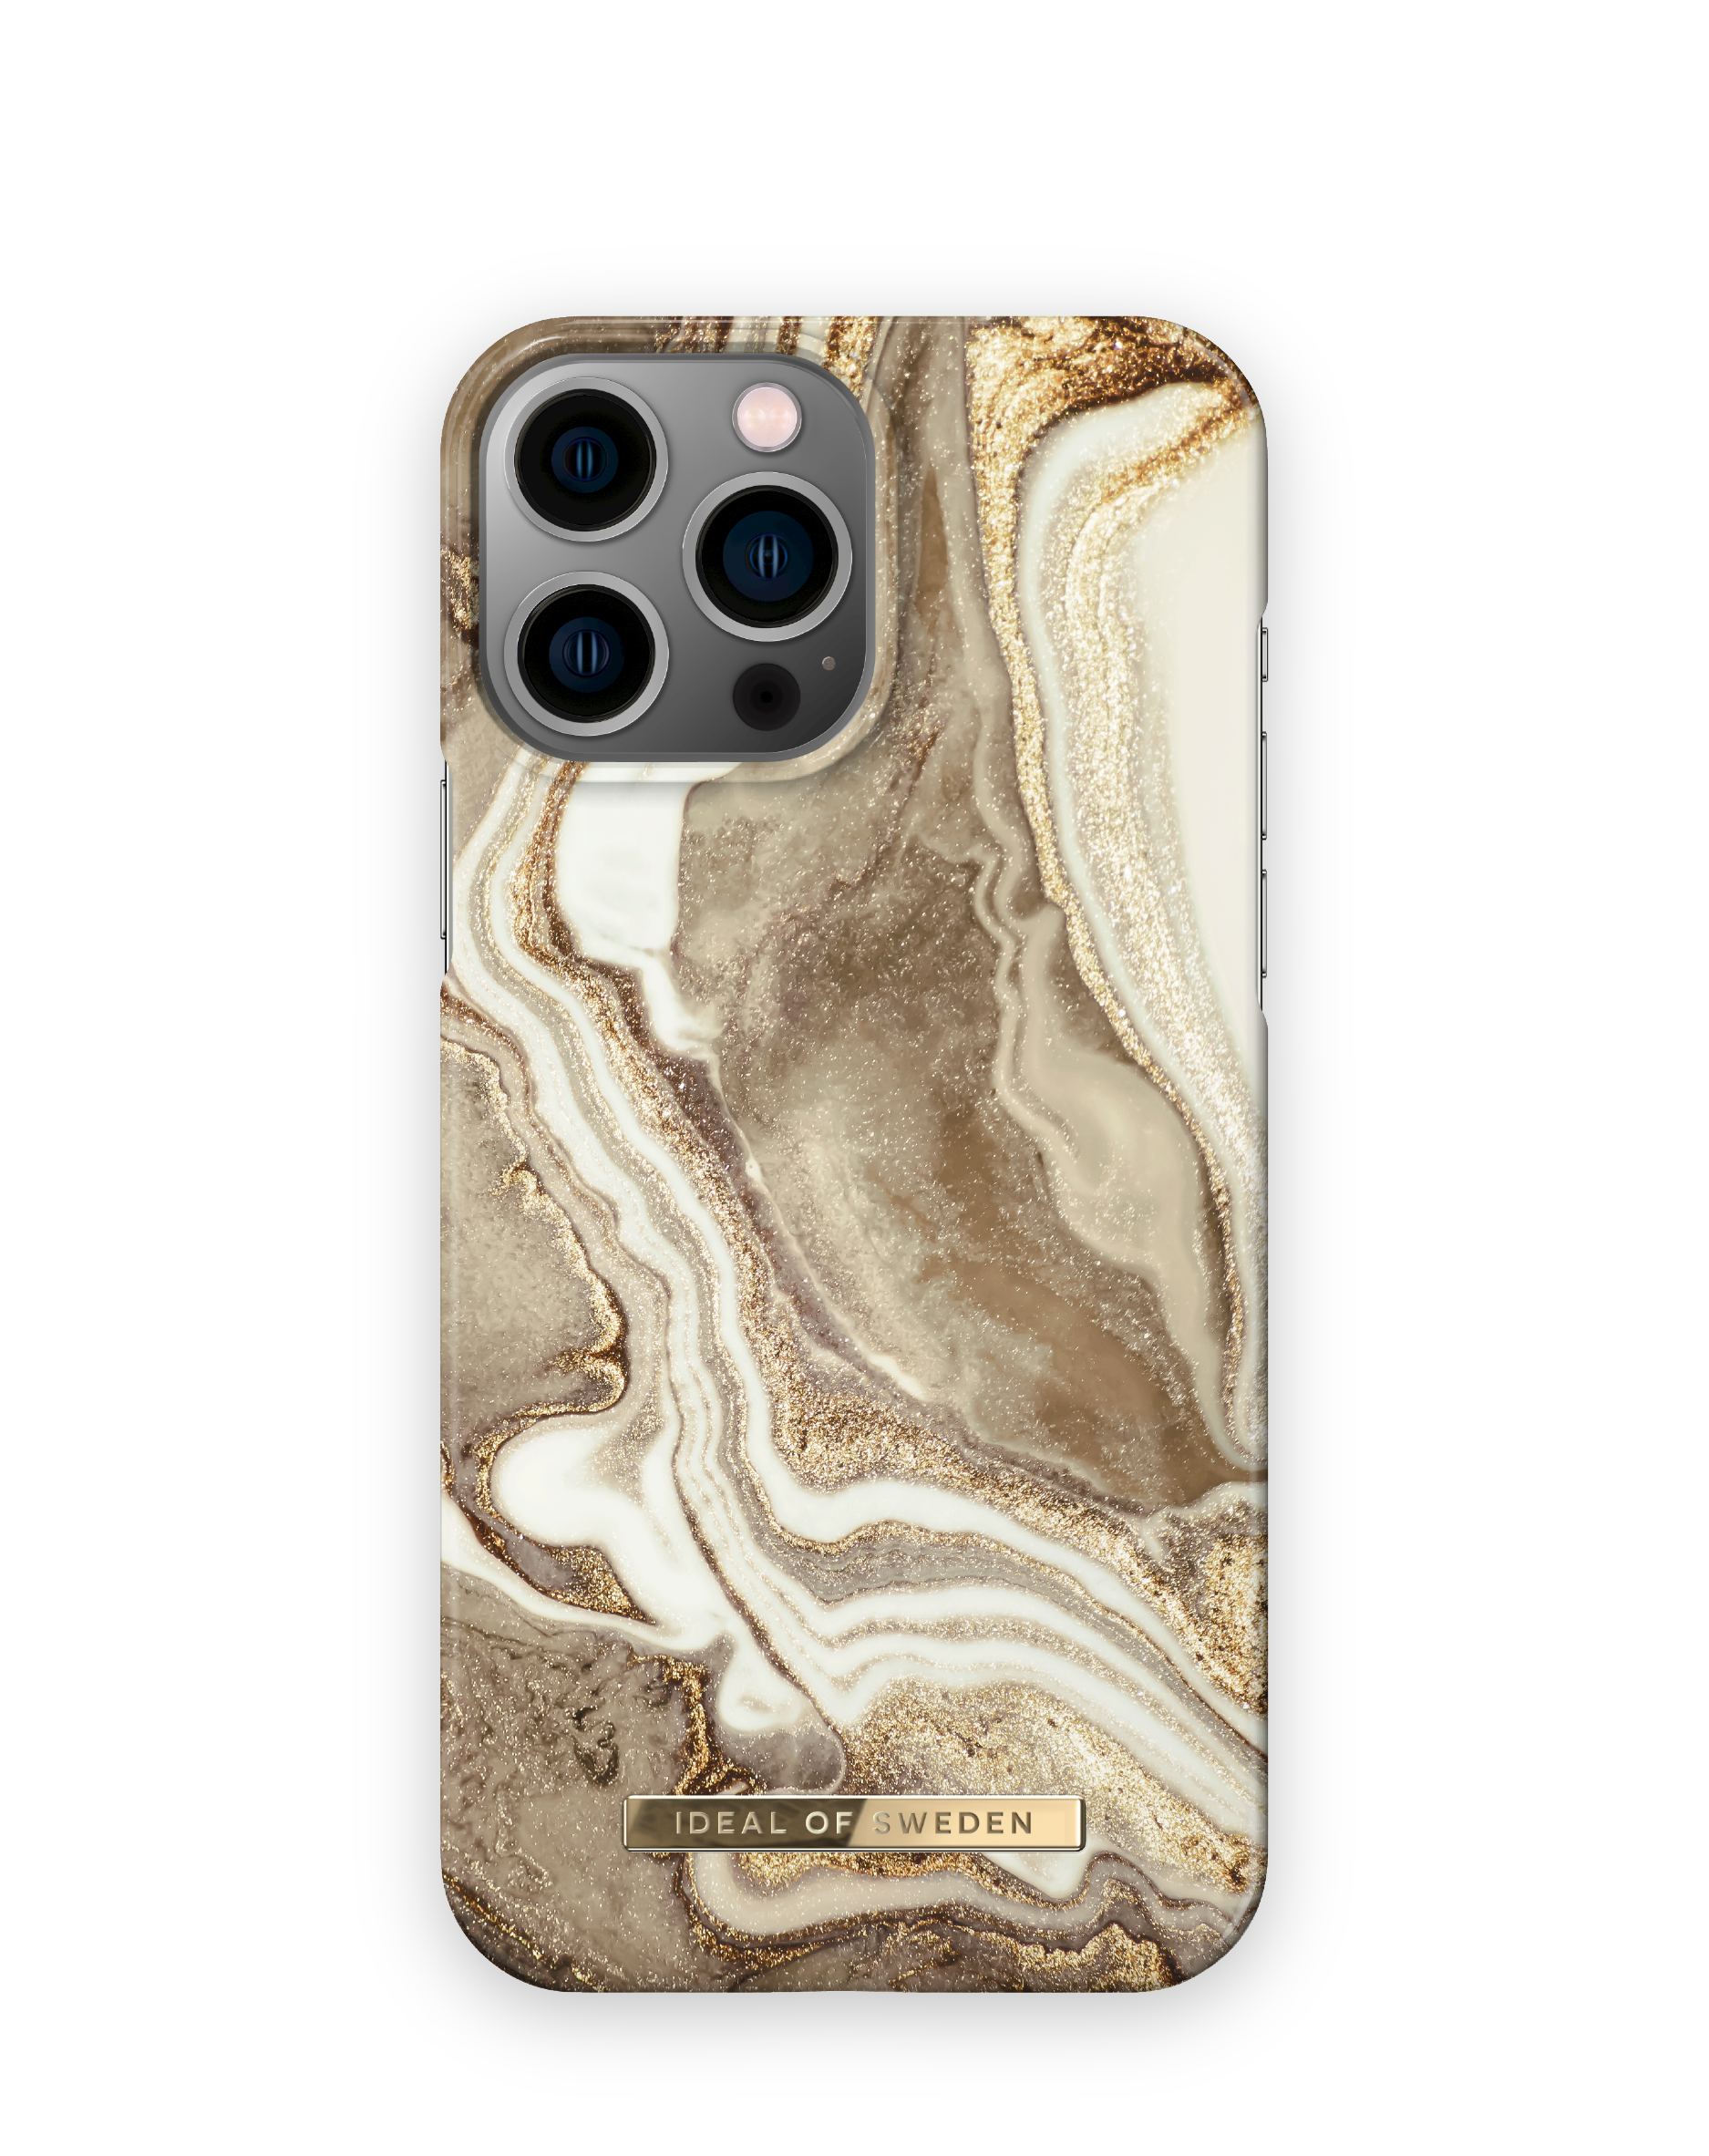 13 Golden IDFCGM19-I2167-164, Sand Max, OF iPhone Marble Backcover, SWEDEN IDEAL Apple, Pro